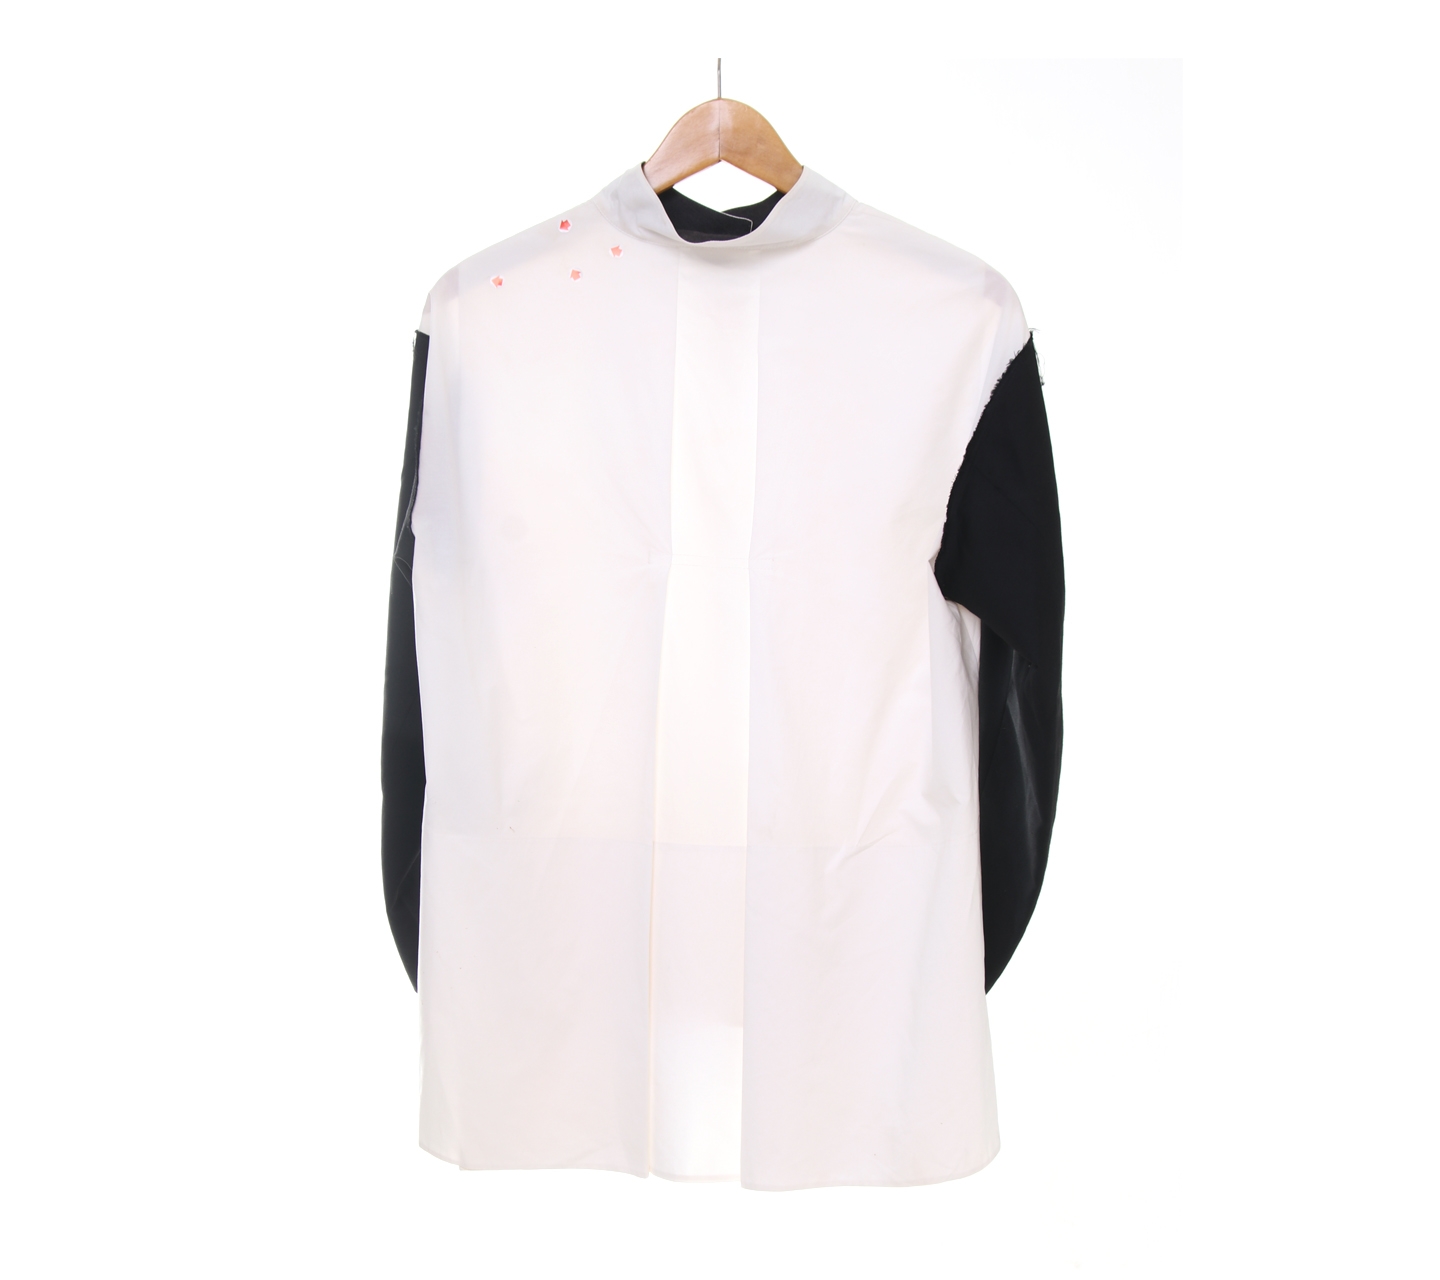 re-code Black & Off White Blouse